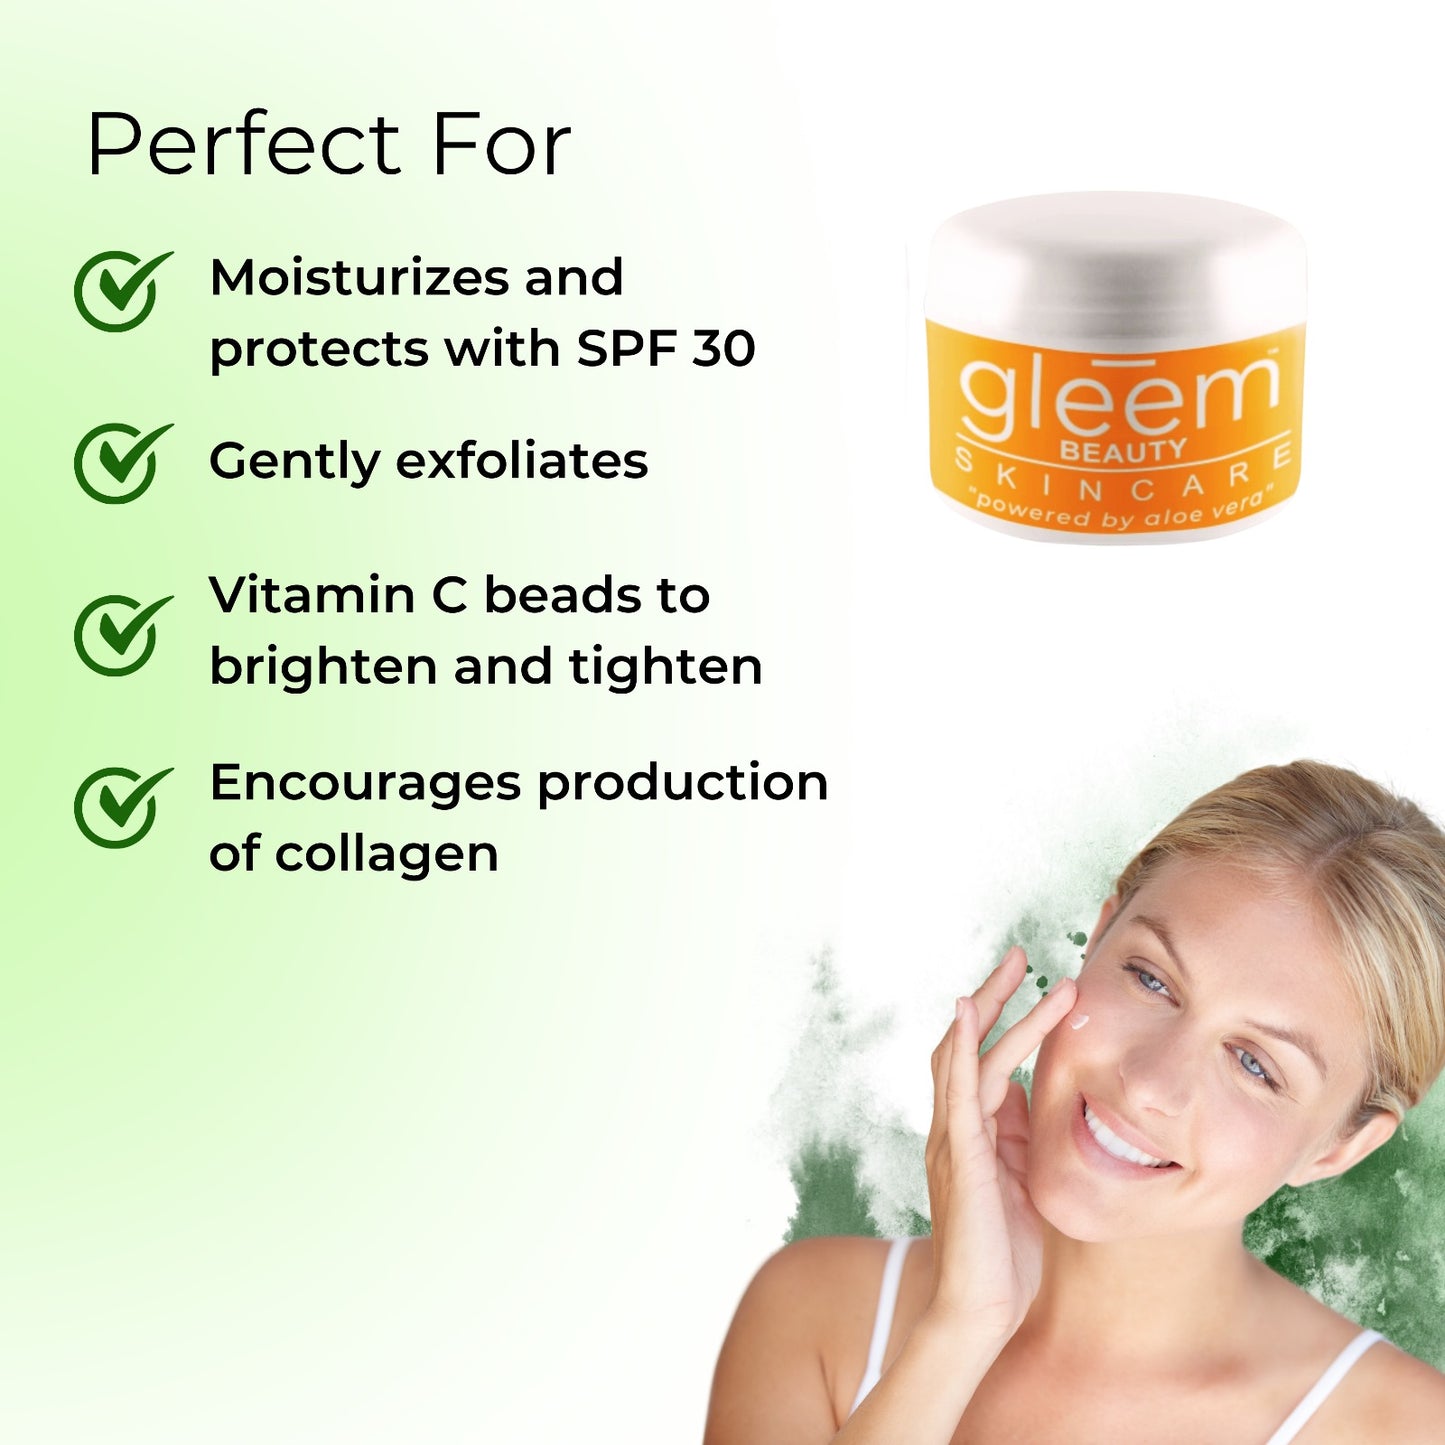 One and done day moisturizer is perfect for moisturizing, gentle exfoliation, and collagen production.